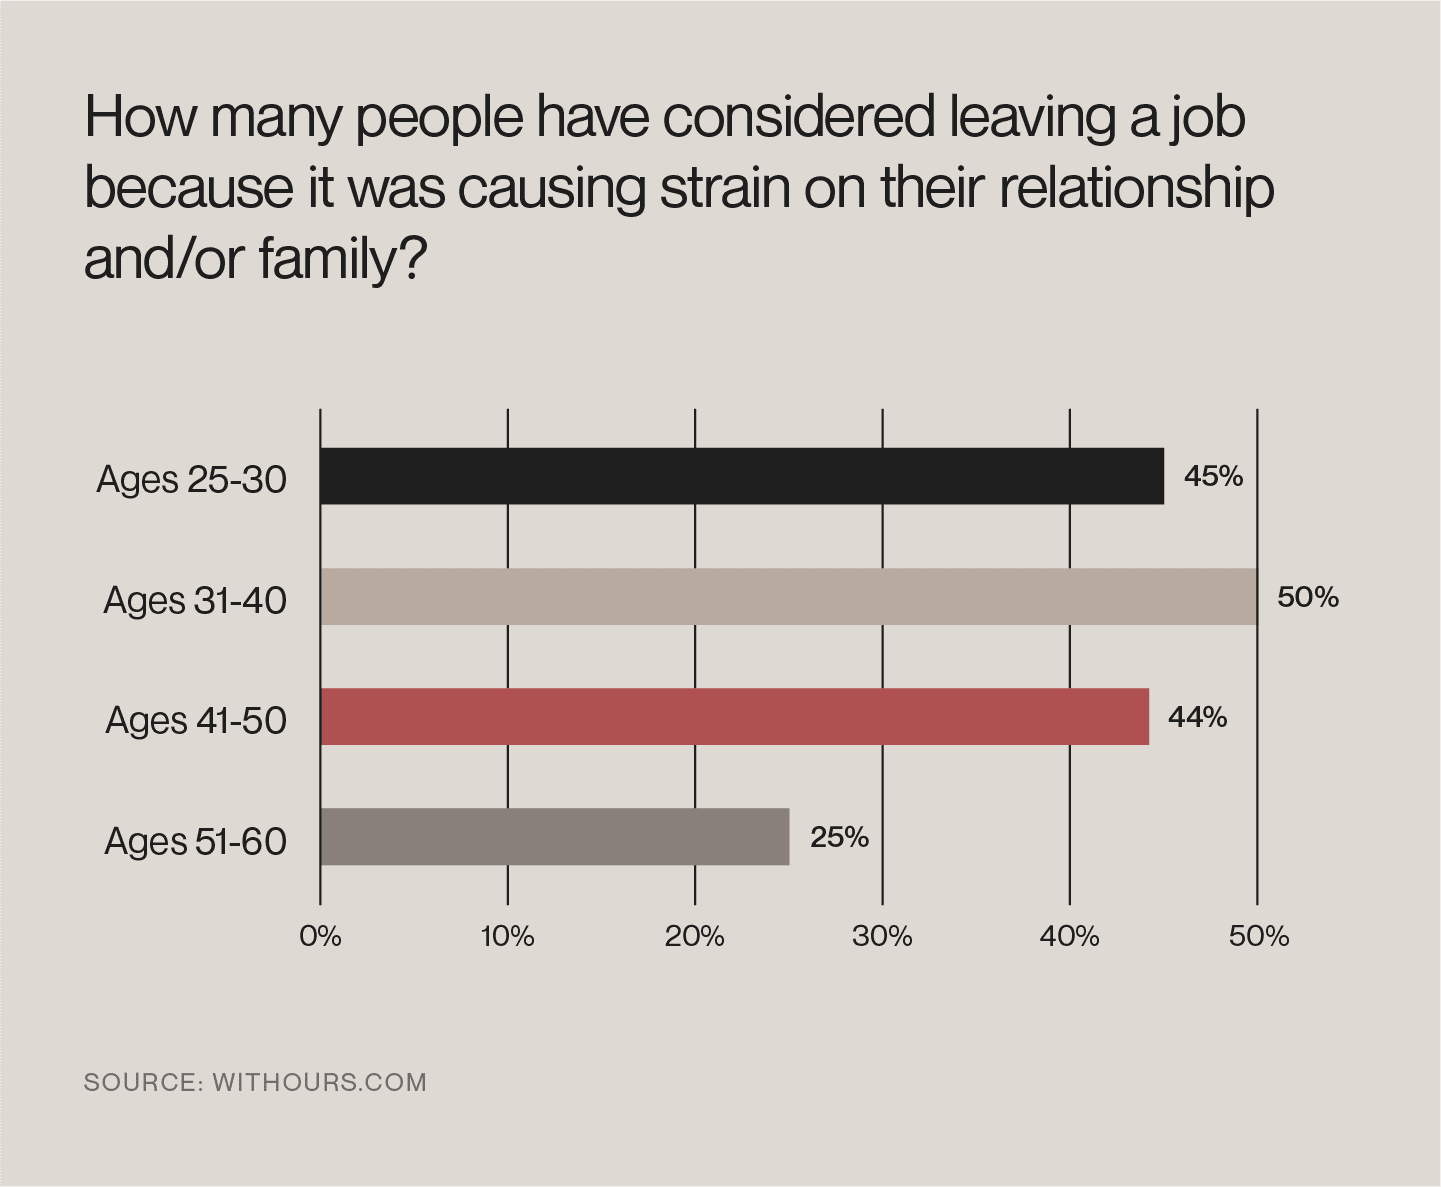 Younger people are more likely to consider leaving a job that harms their relationship.